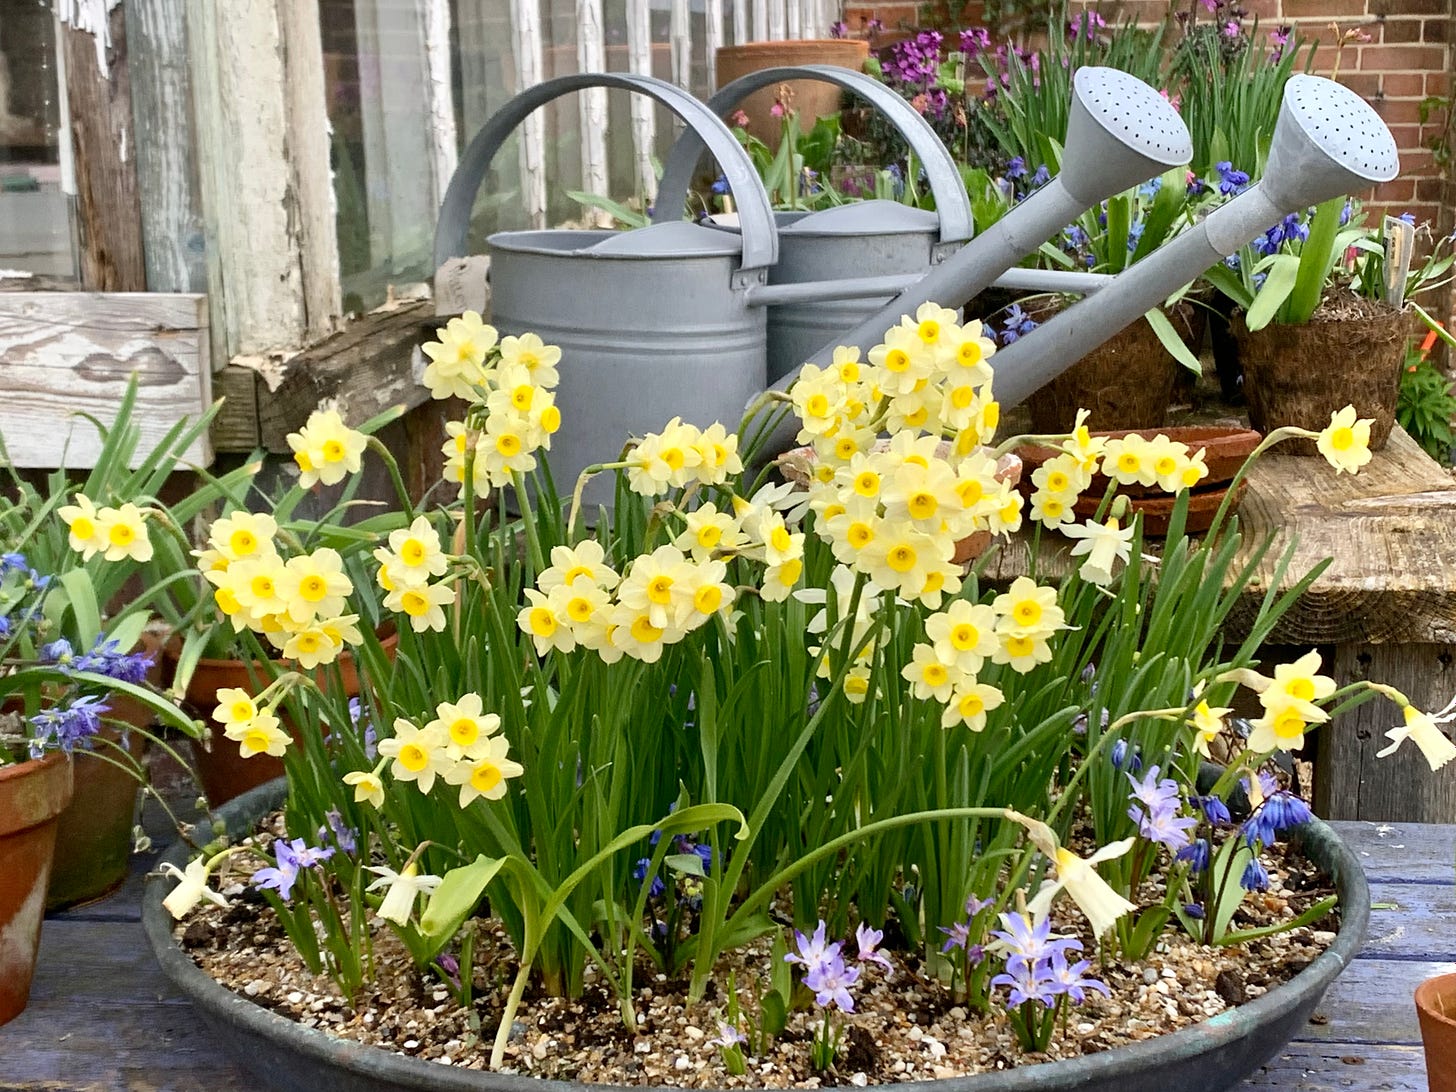 yellow and blue flowers in a bowl with two watering cans